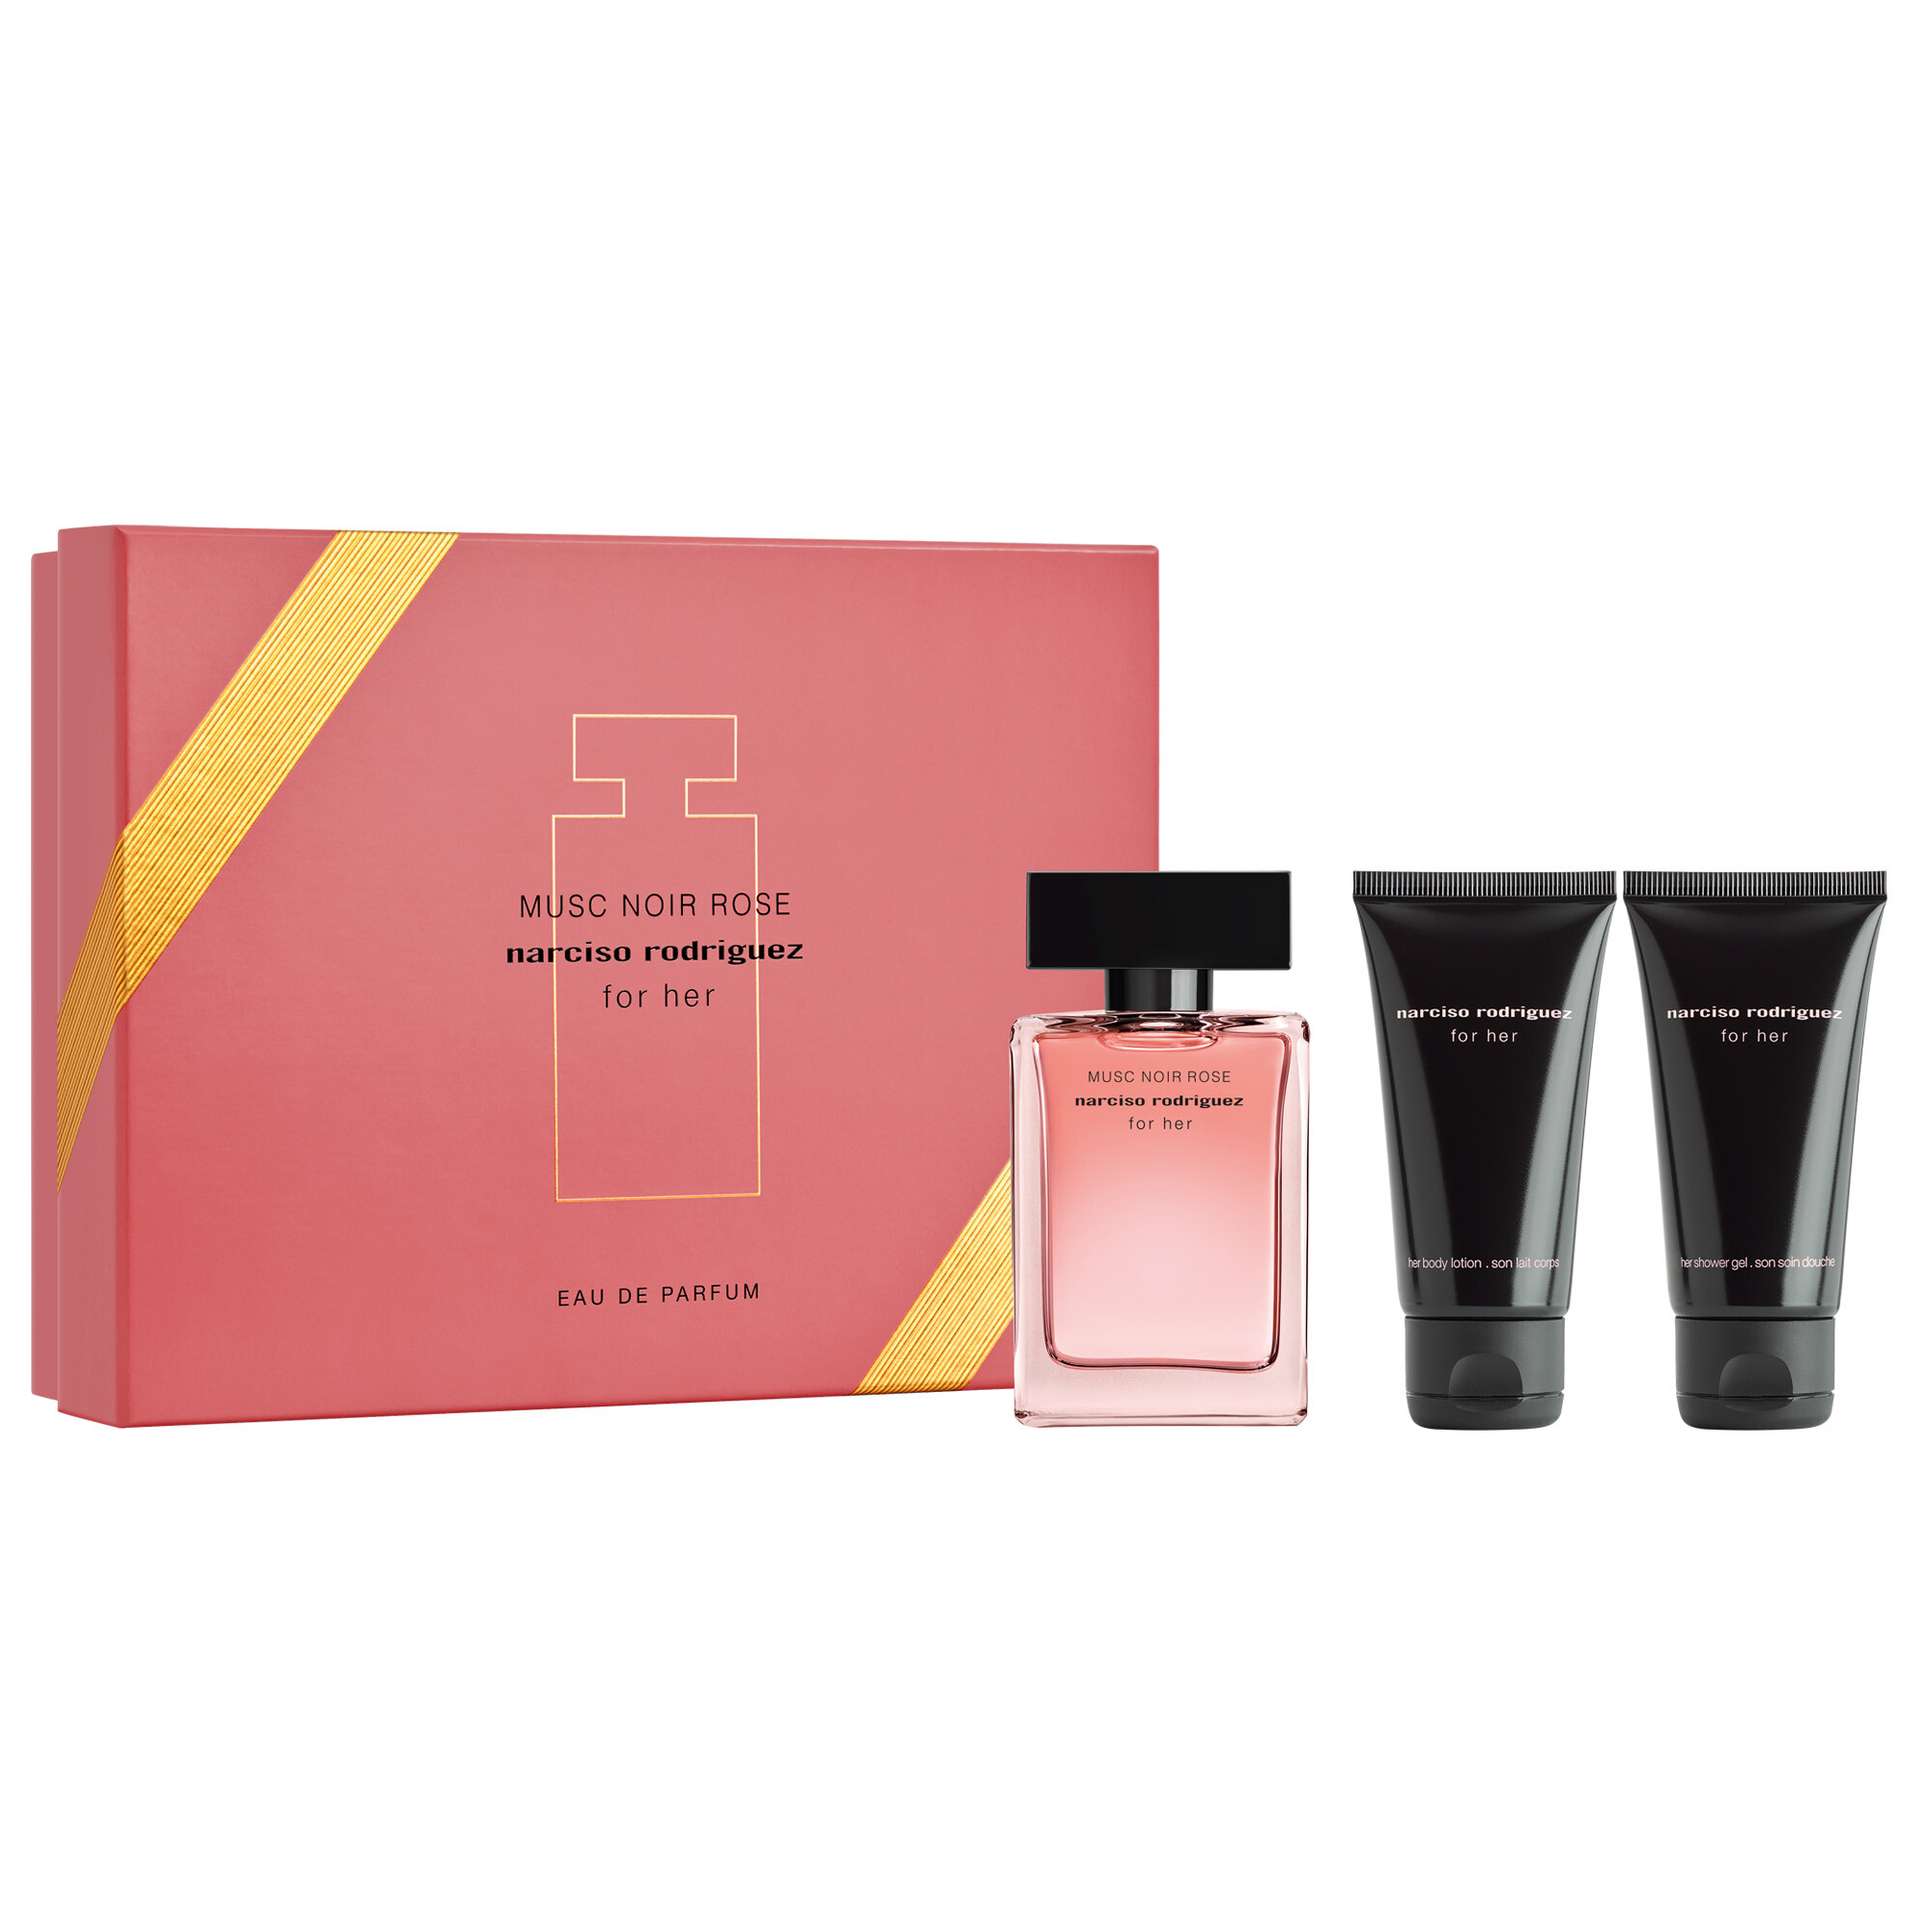 Narciso Rodriguez for her Musc Noir Rose Set